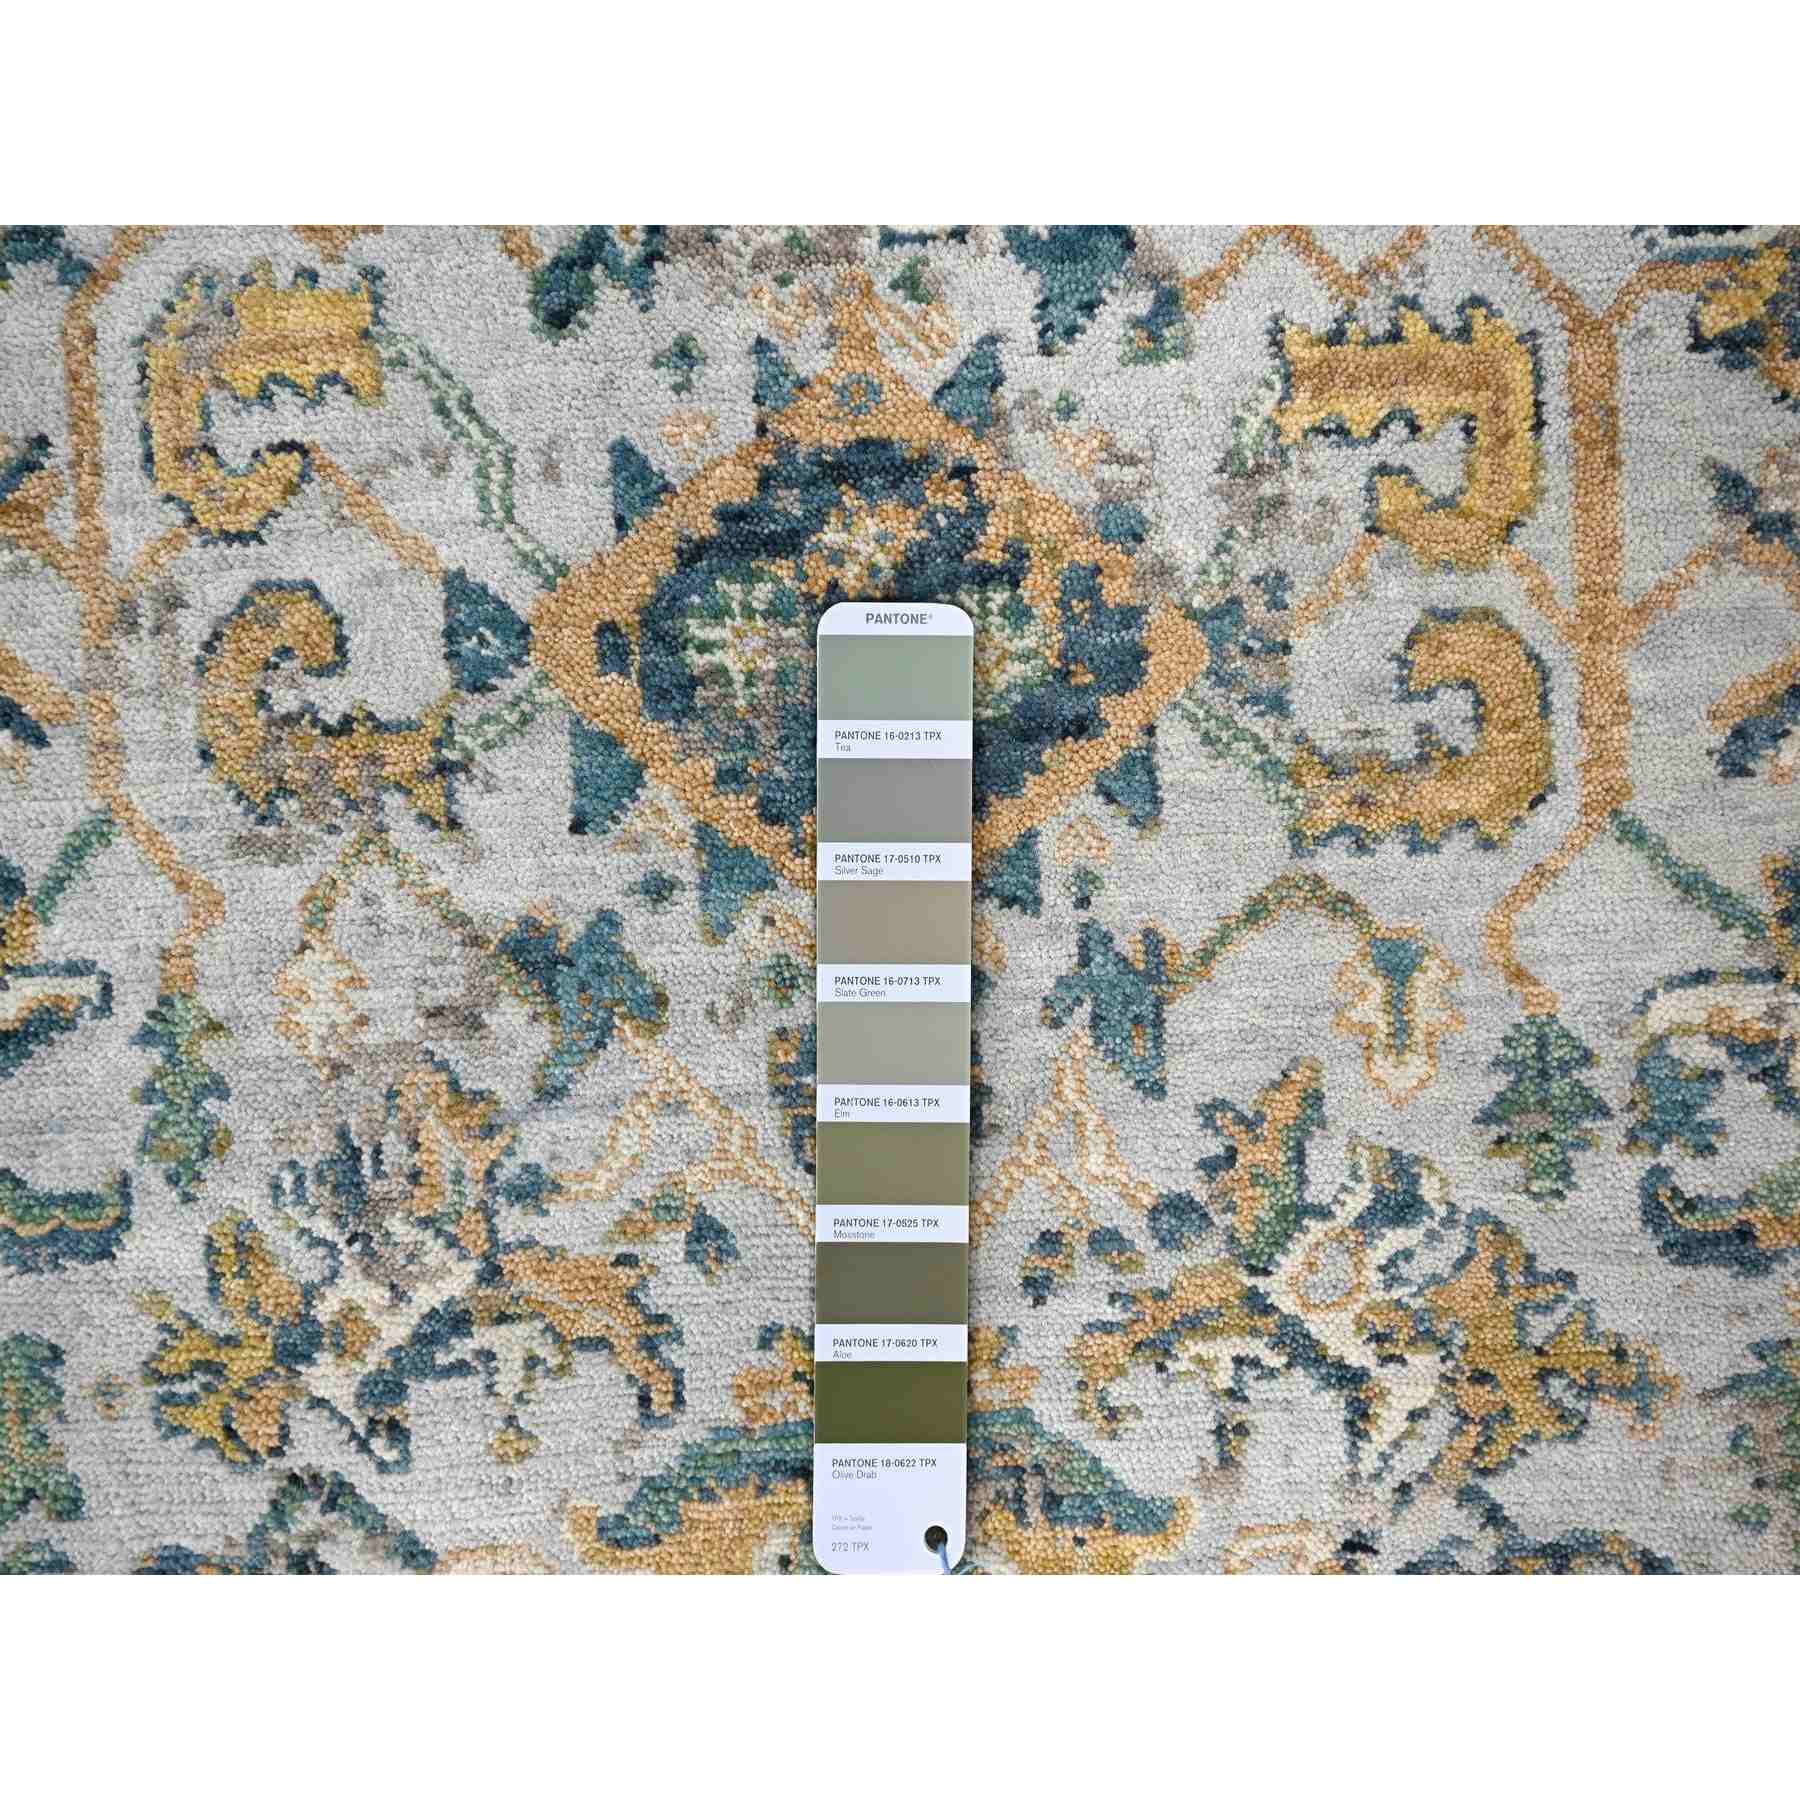 Transitional-Hand-Knotted-Rug-424655